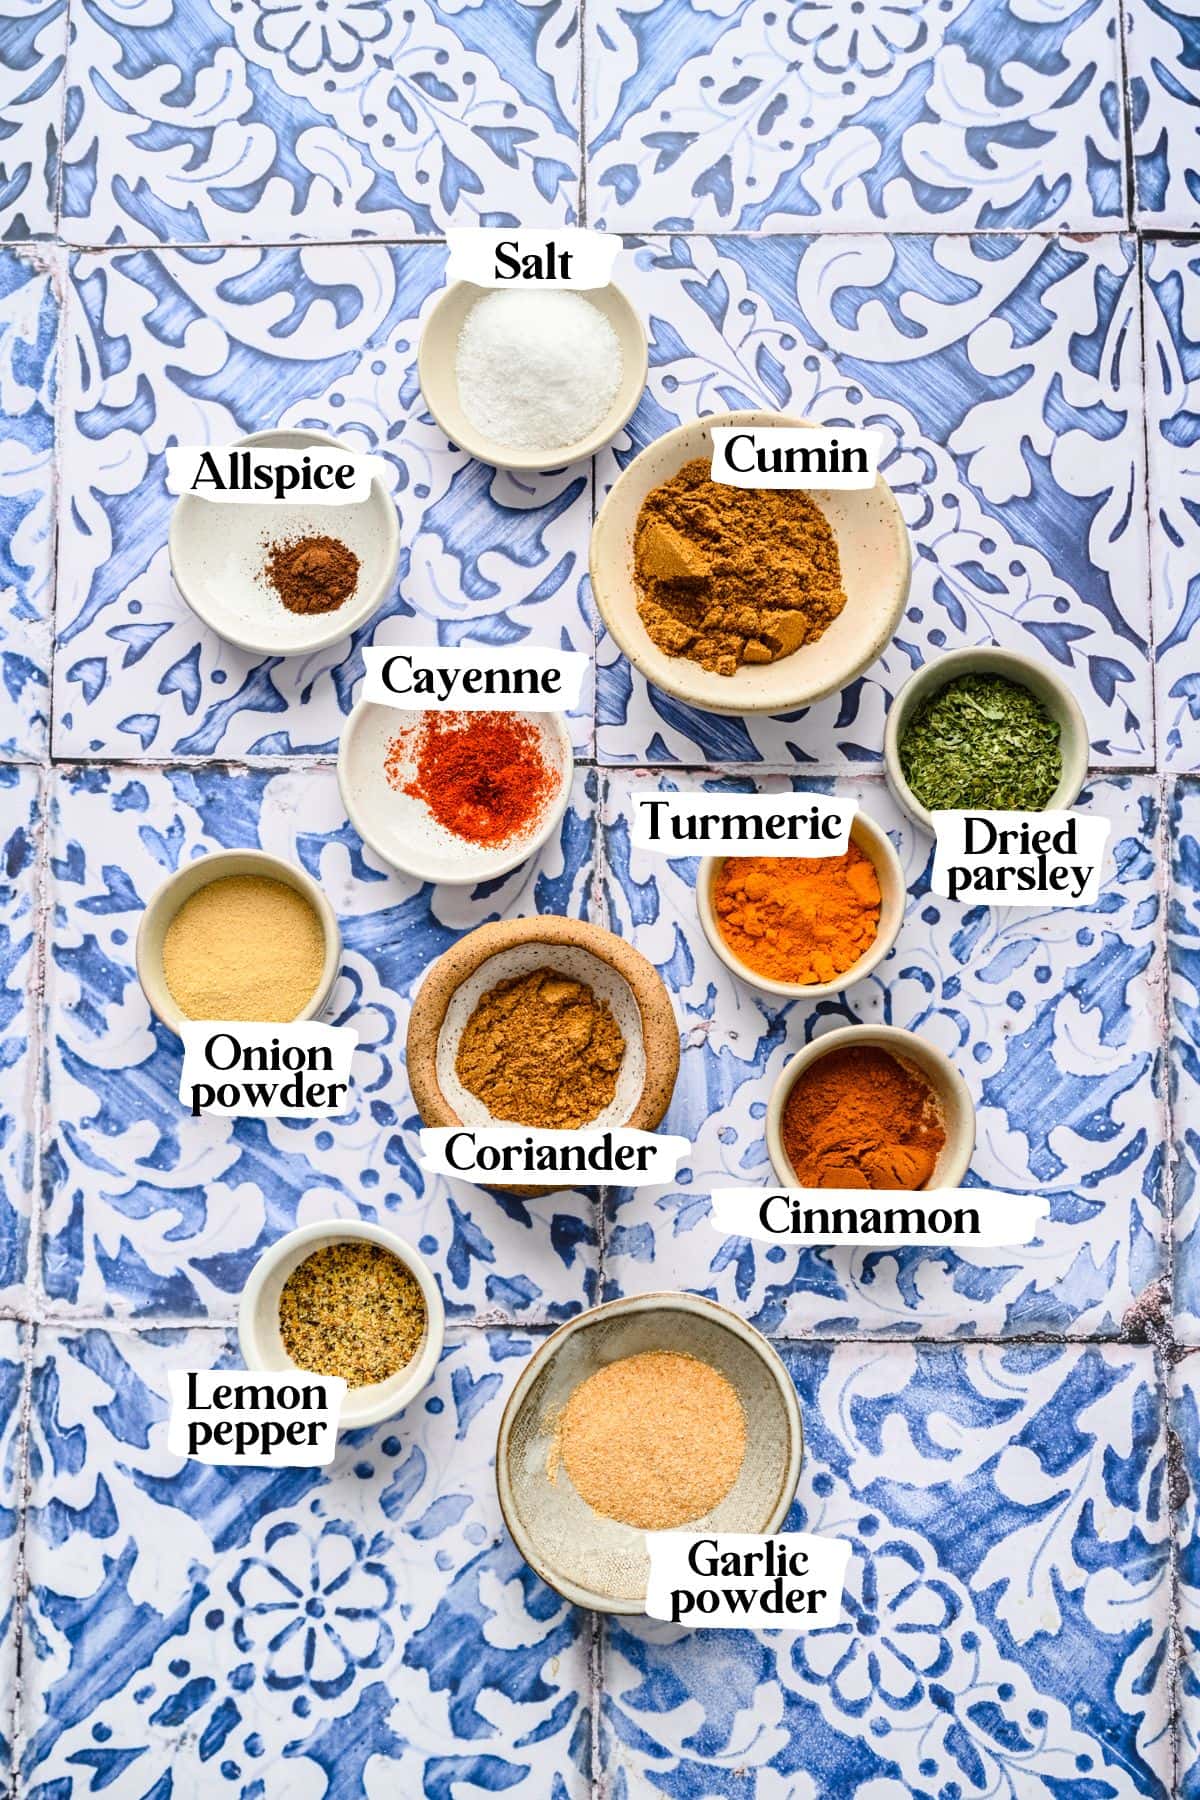 Chermoula spice ingredients including cayenne and turmeric.